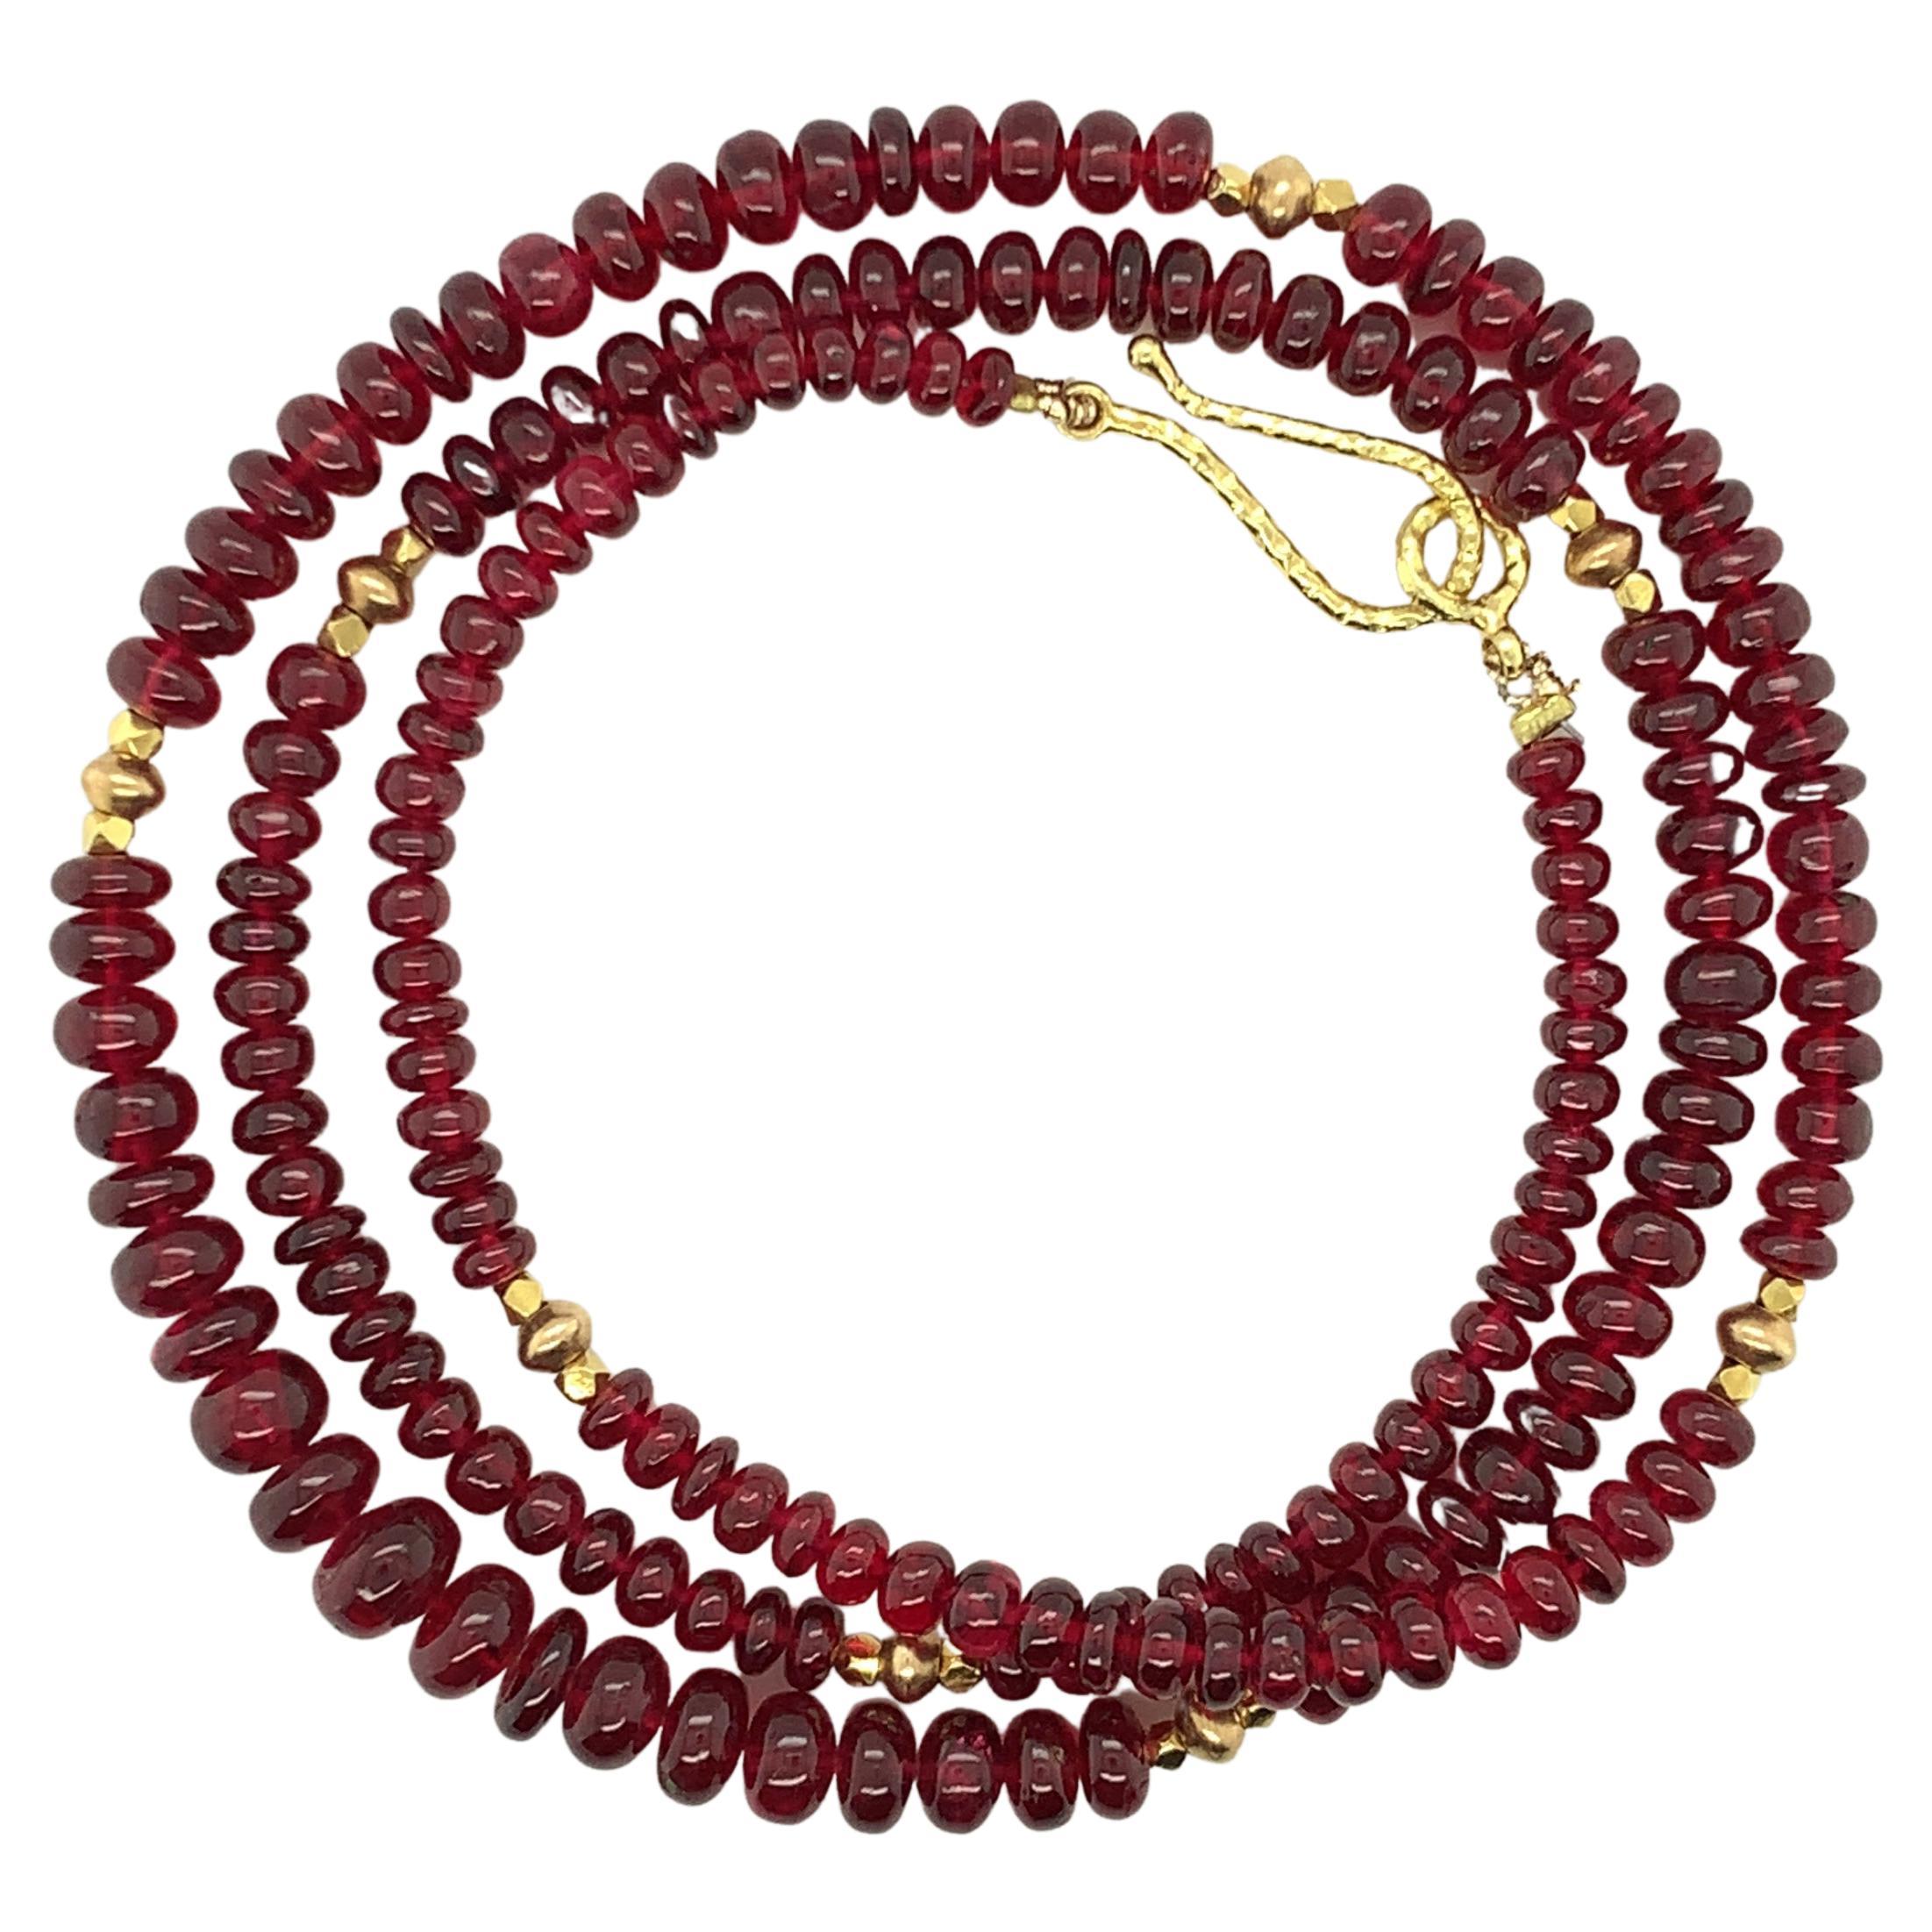 Red Spinel Graduating Bead Necklace with Yellow Gold Spacers, 19 Inches